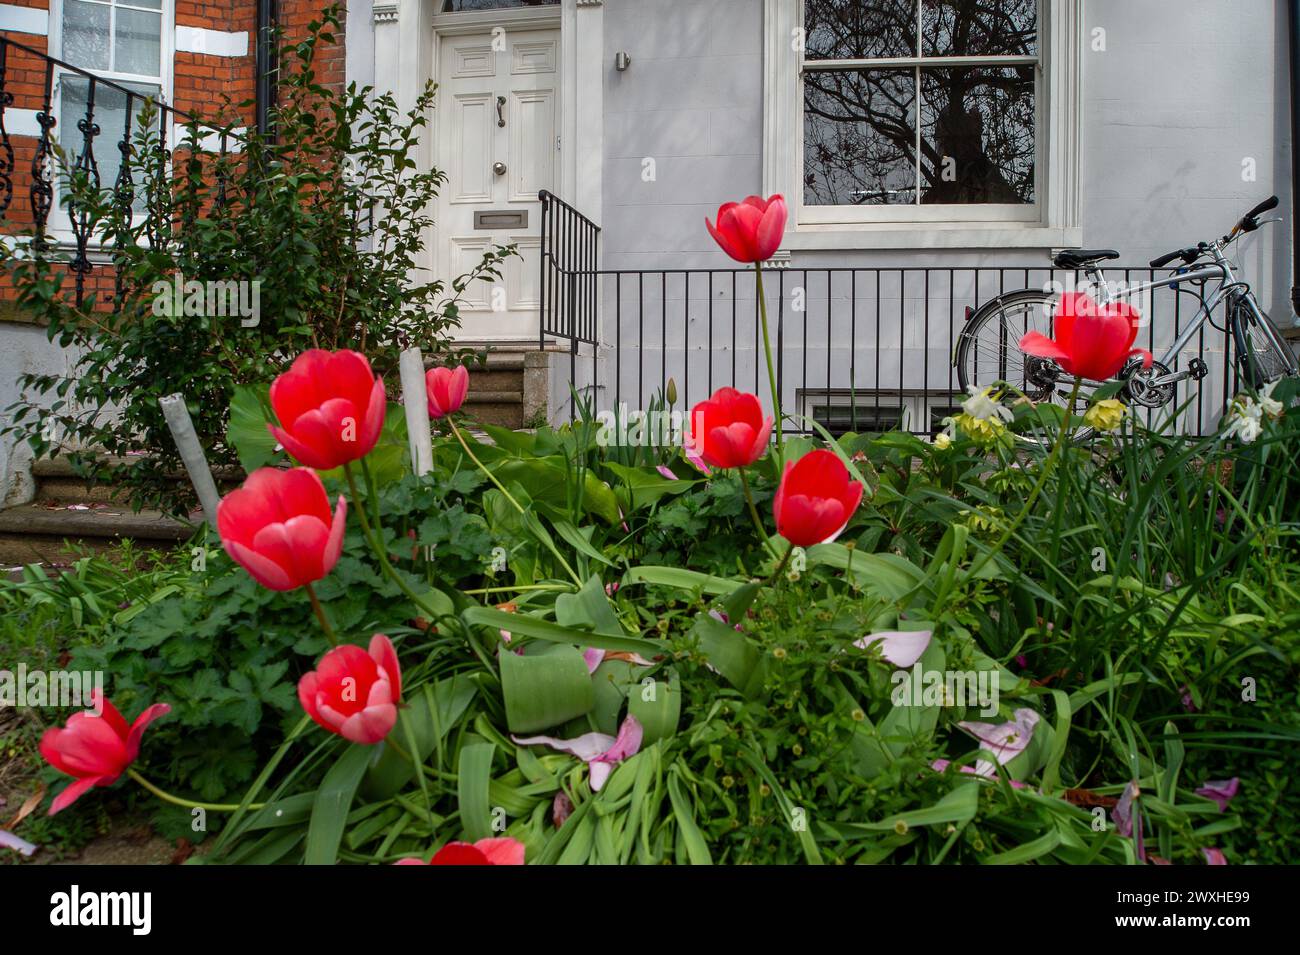 Westminster, London, UK. 26th March, 2024. Tulips outside a terraced house in Westminster, London. Property prices are reported to be rising again. Credit: Maureen McLean/Alamy Stock Photo